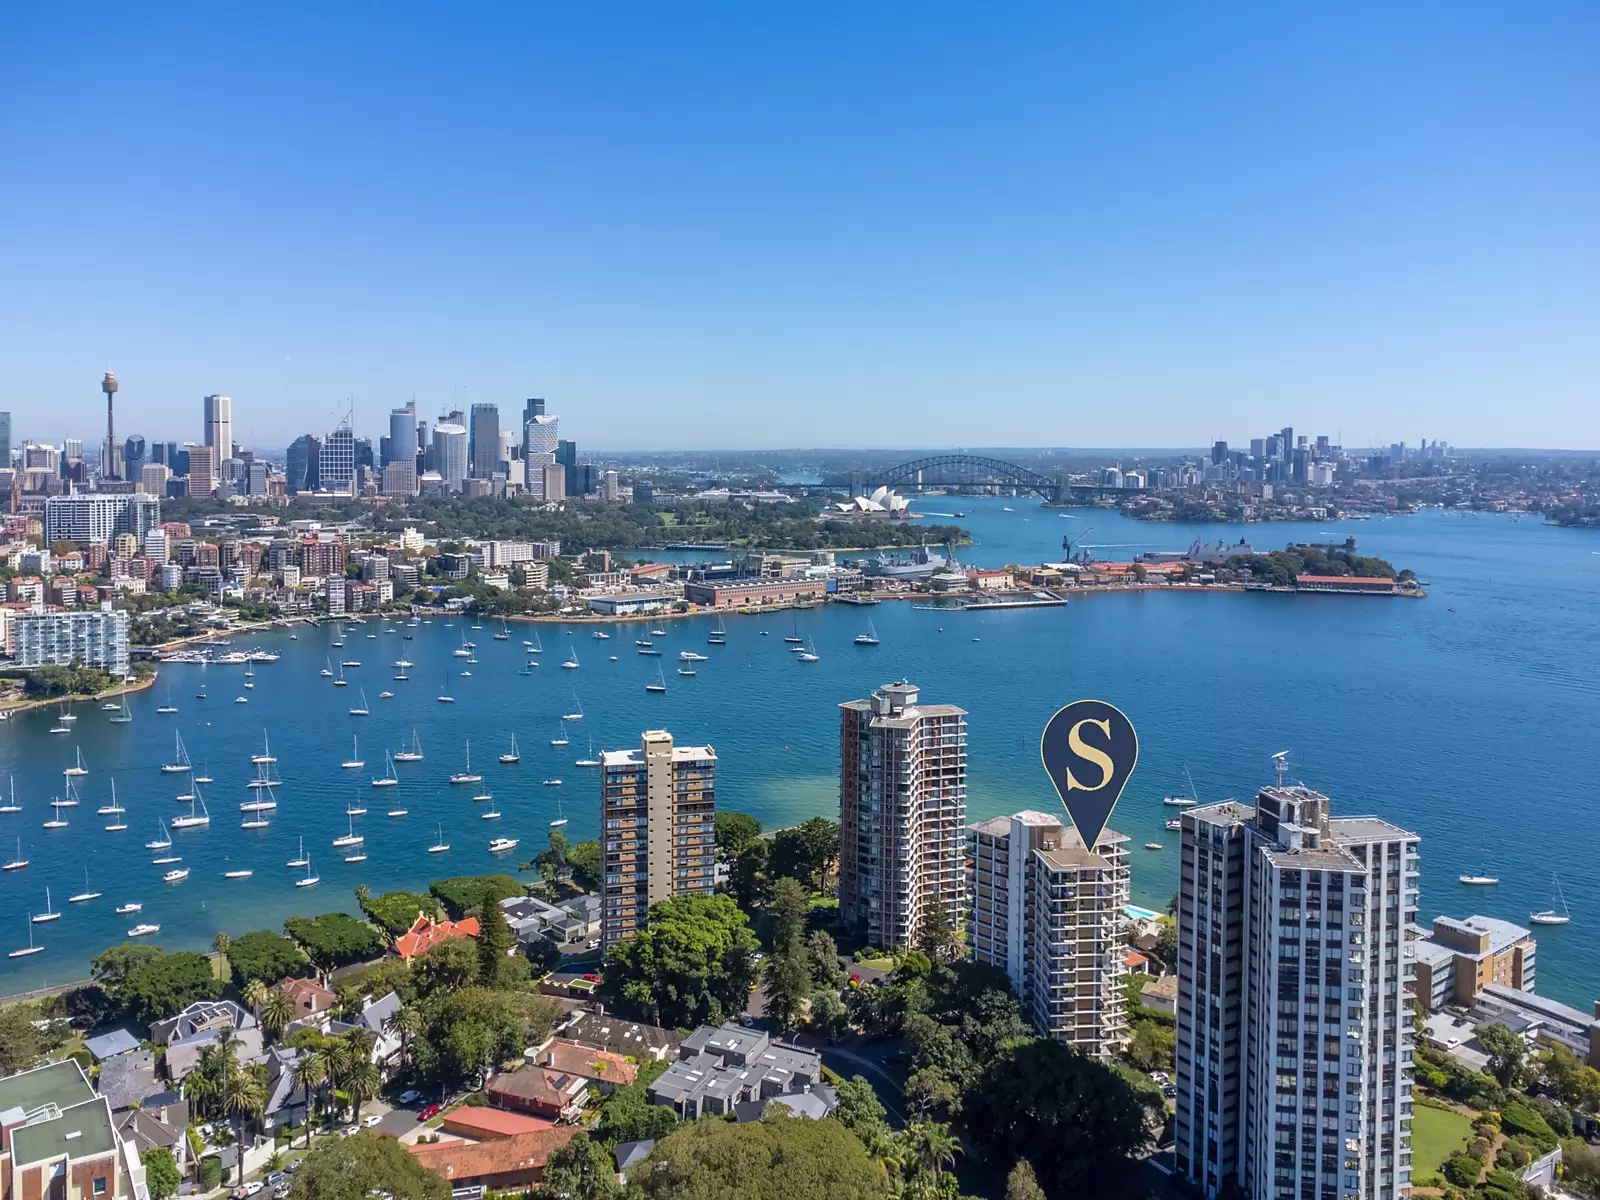 Photo #15: 6C/13-15 Thornton Street, Darling Point - Sold by Sydney Sotheby's International Realty